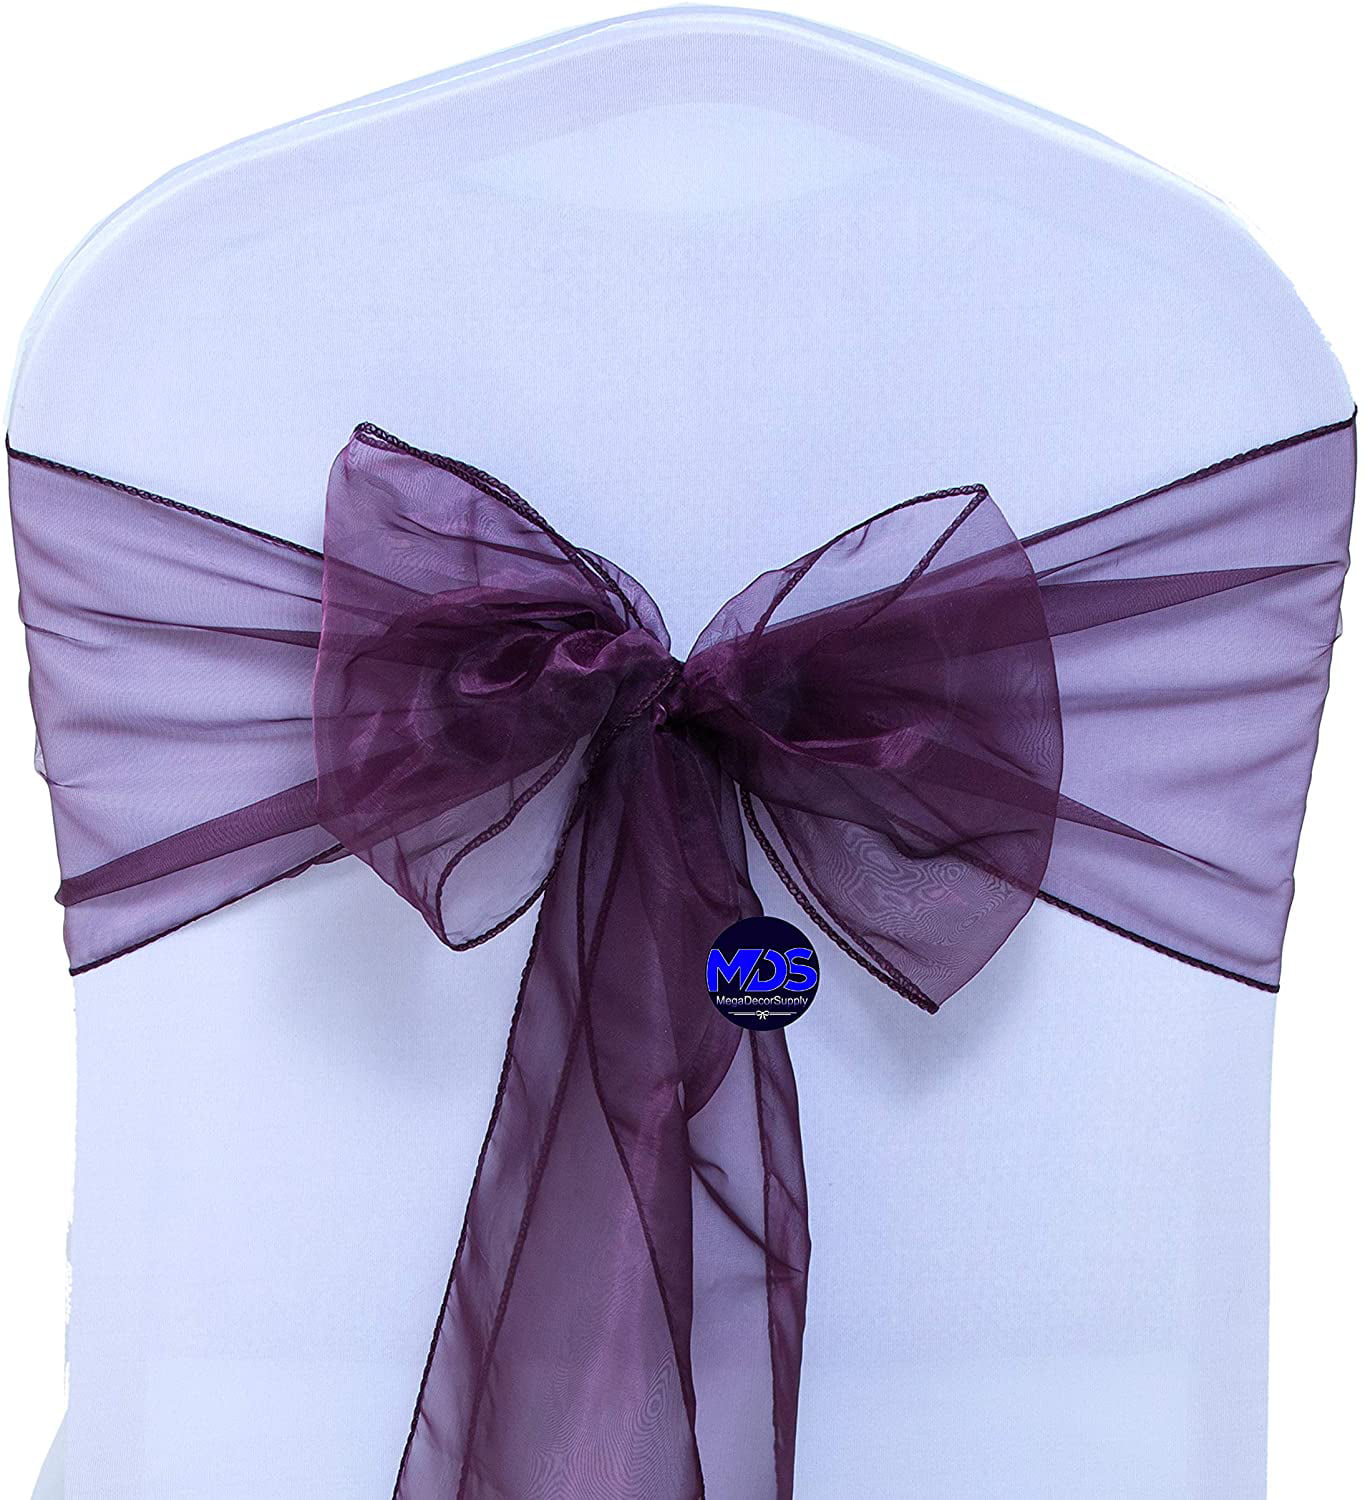 Details about   ORGANZA CHAIR SASHES COVER BOW WEDDING PARTY DECORATION EVENT PLUM High Quality 